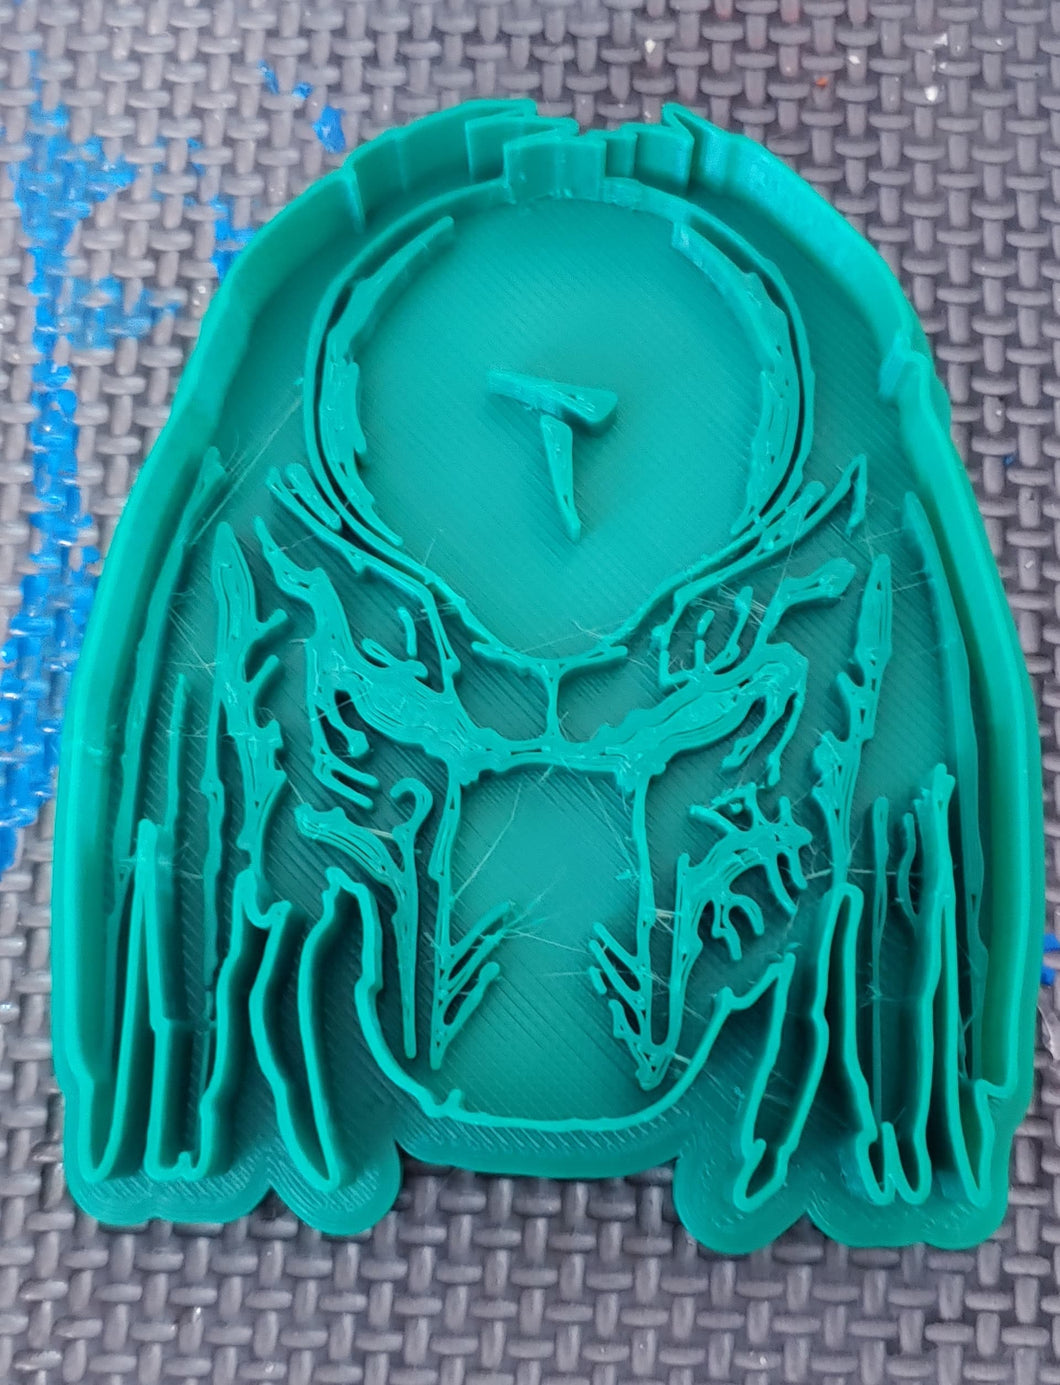 3D Printed Cookie Cutter Inspired by Predator